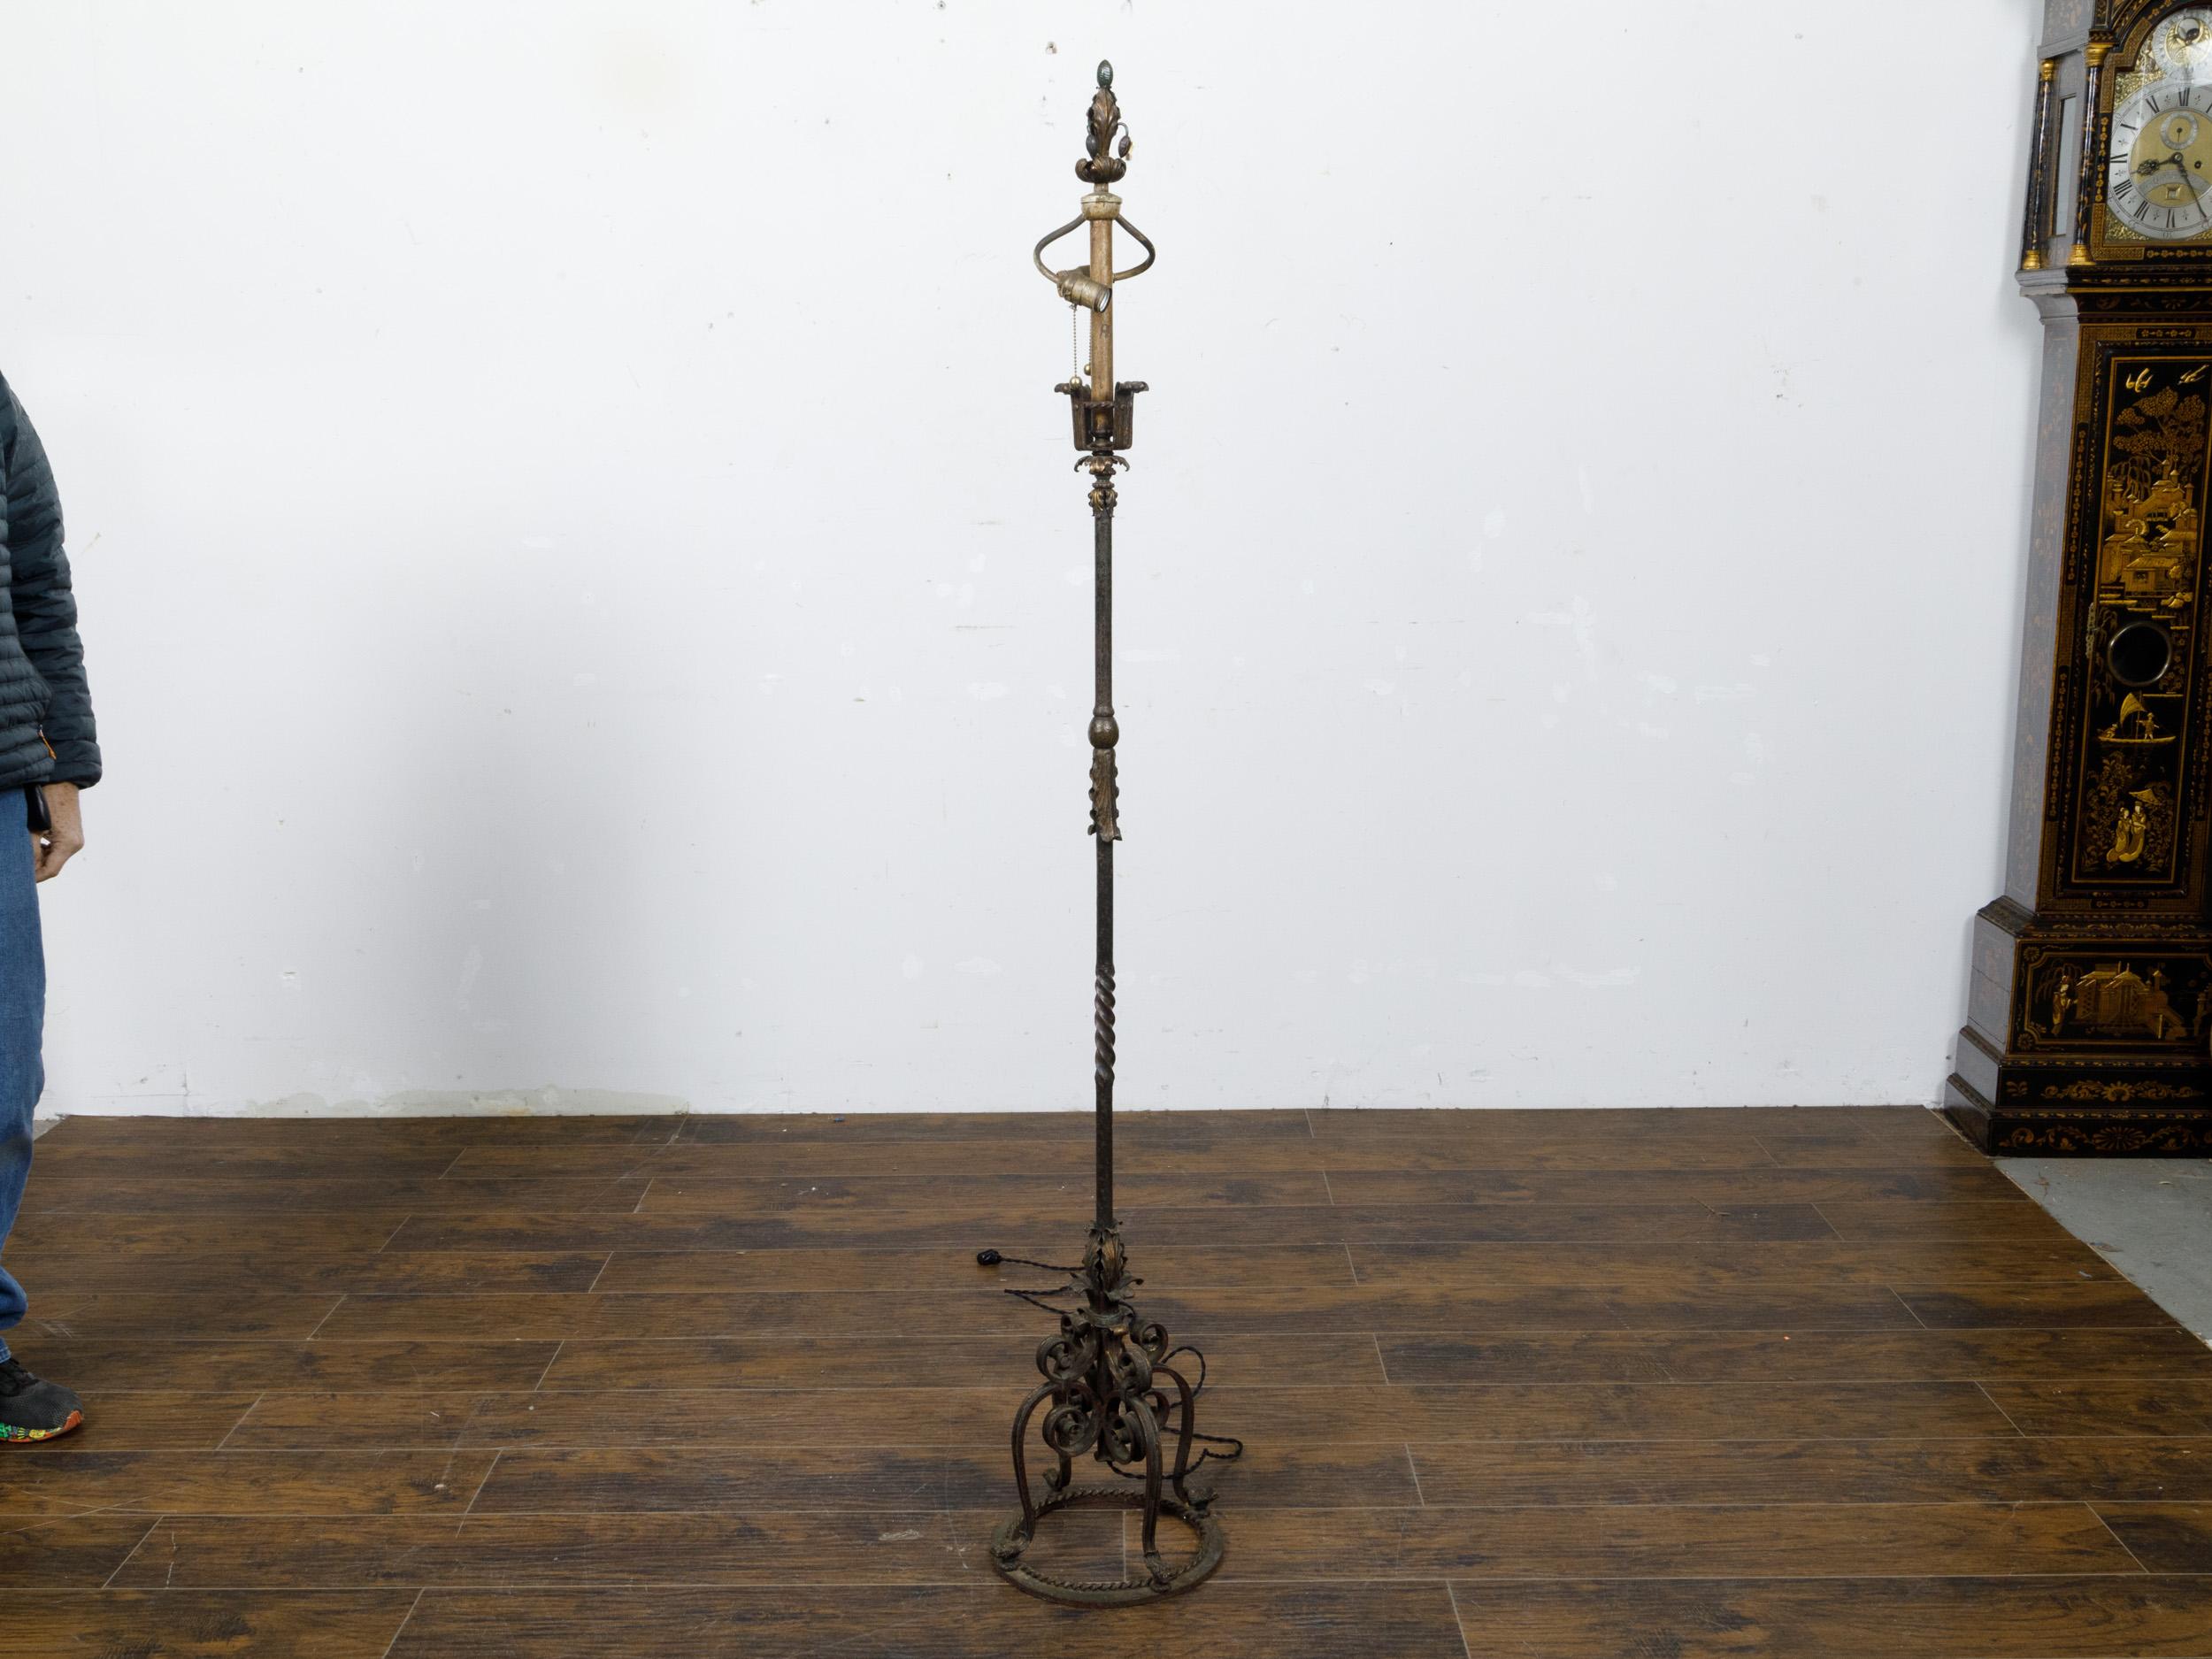 20th Century French Steel and Brass 1930s Floor Lamp with Scrolling Legs and Foliage Motifs For Sale